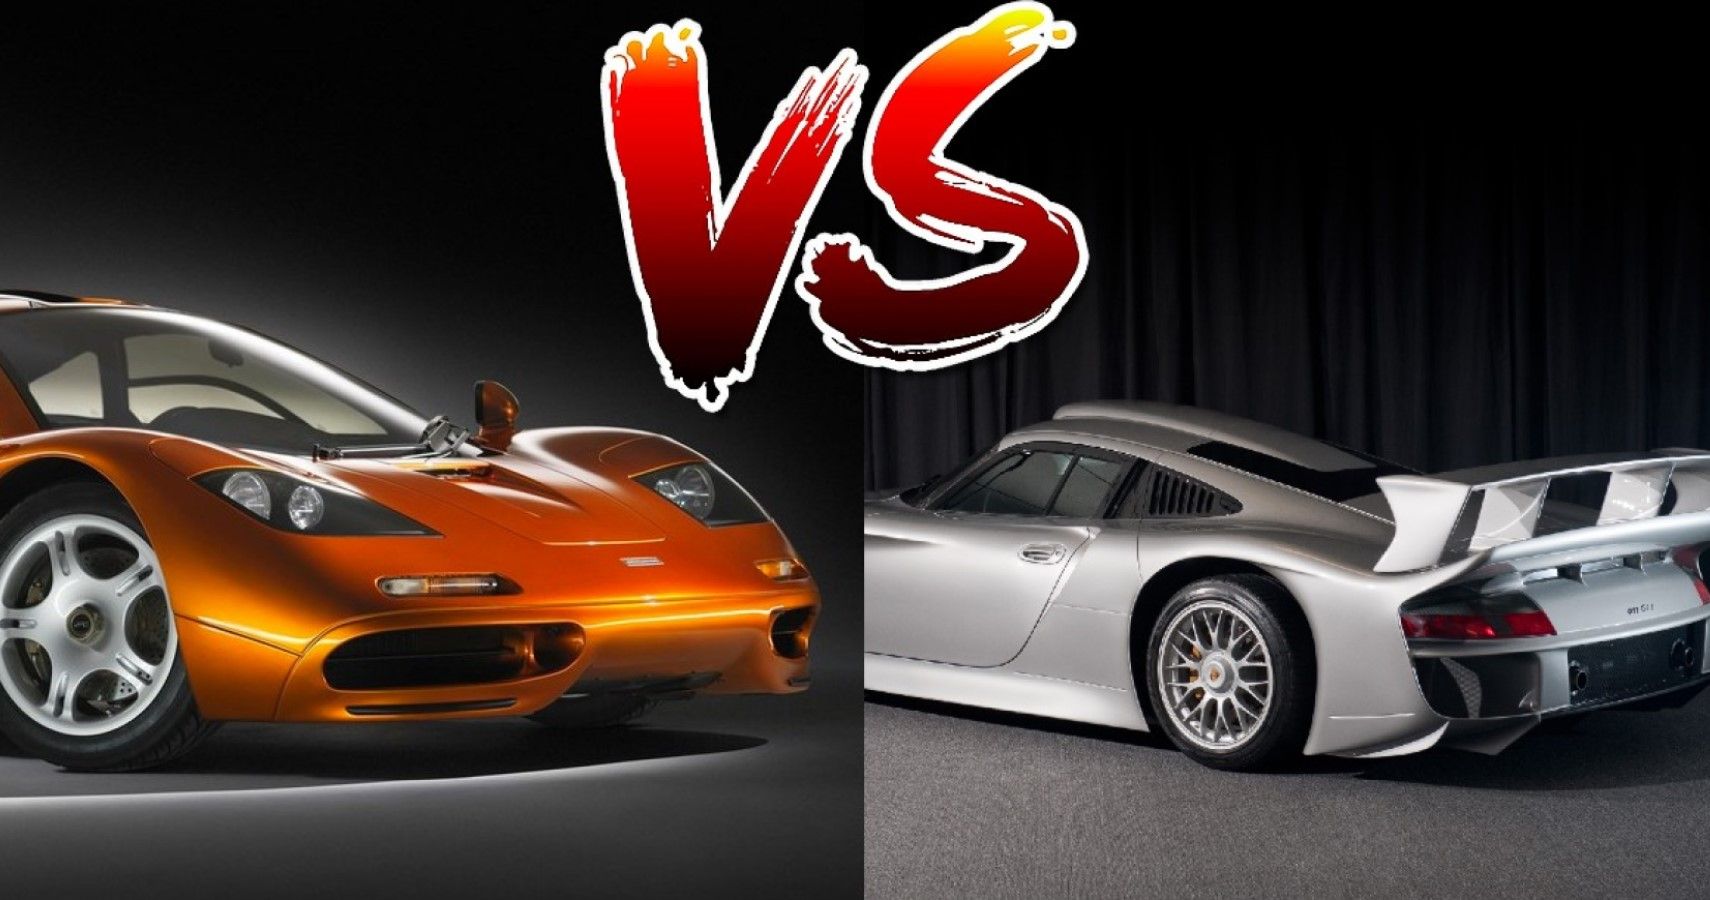 McLaren F1 and Porsche 911 GT1 Strassenversion are two different takes on aggression